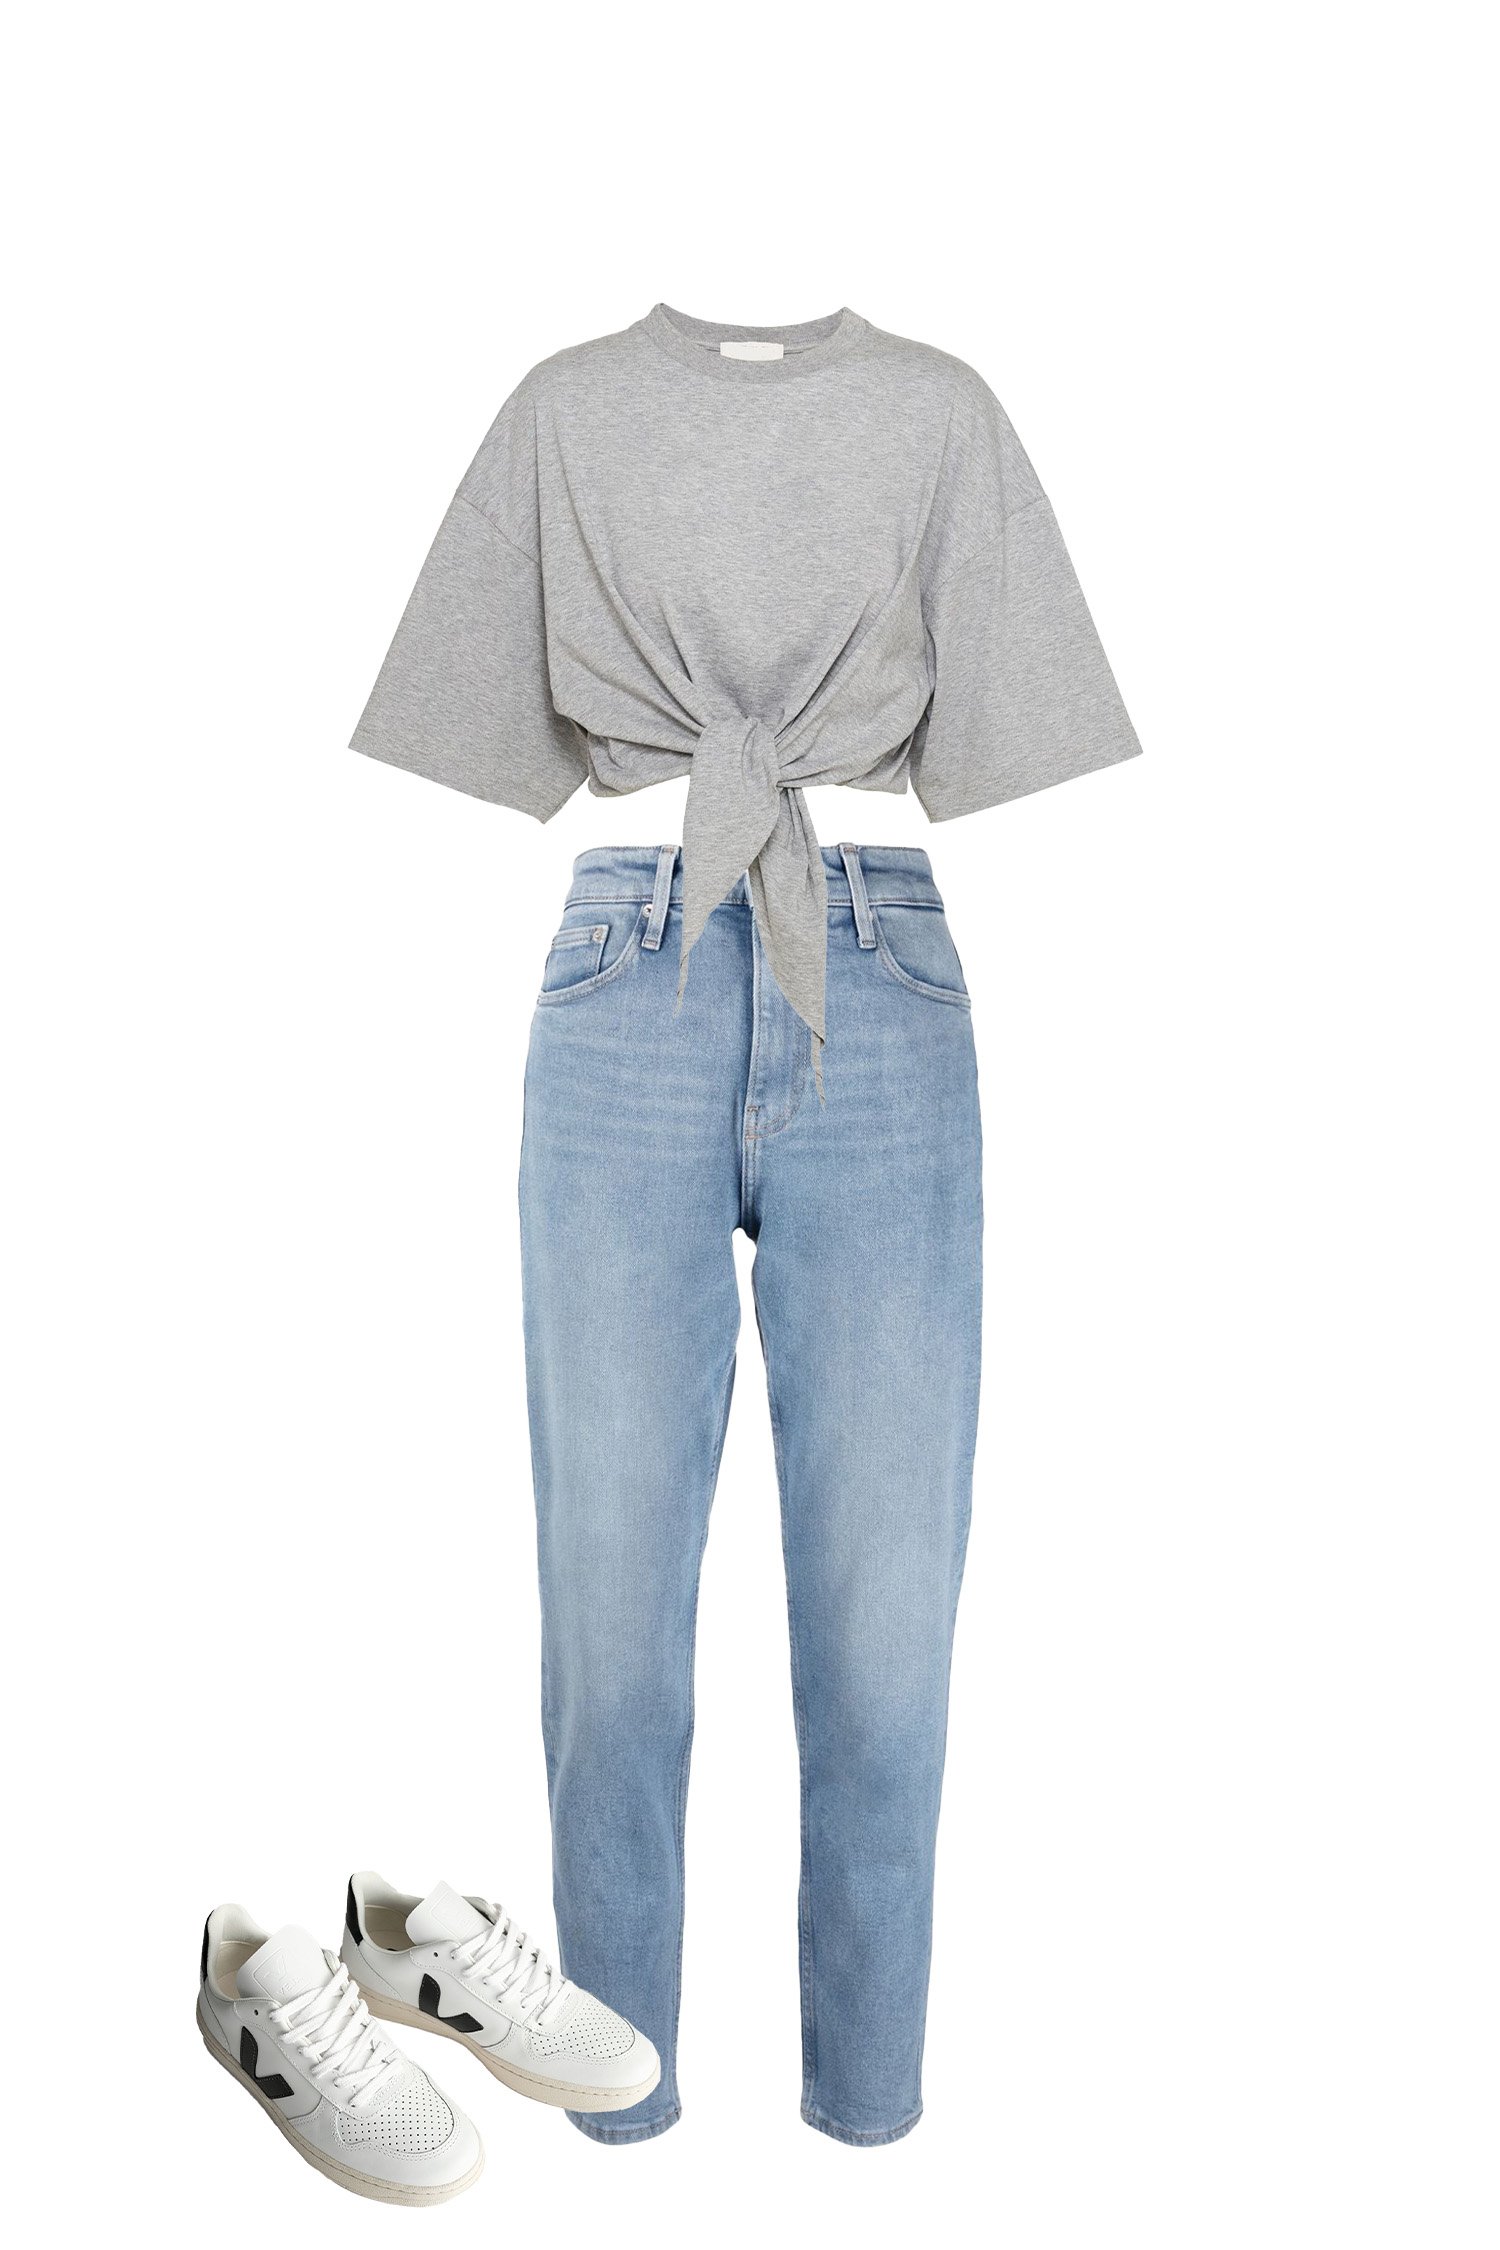 High Waisted Light Wash Mom Jeans - Gray Tie Front T-shirt - White Sneakers